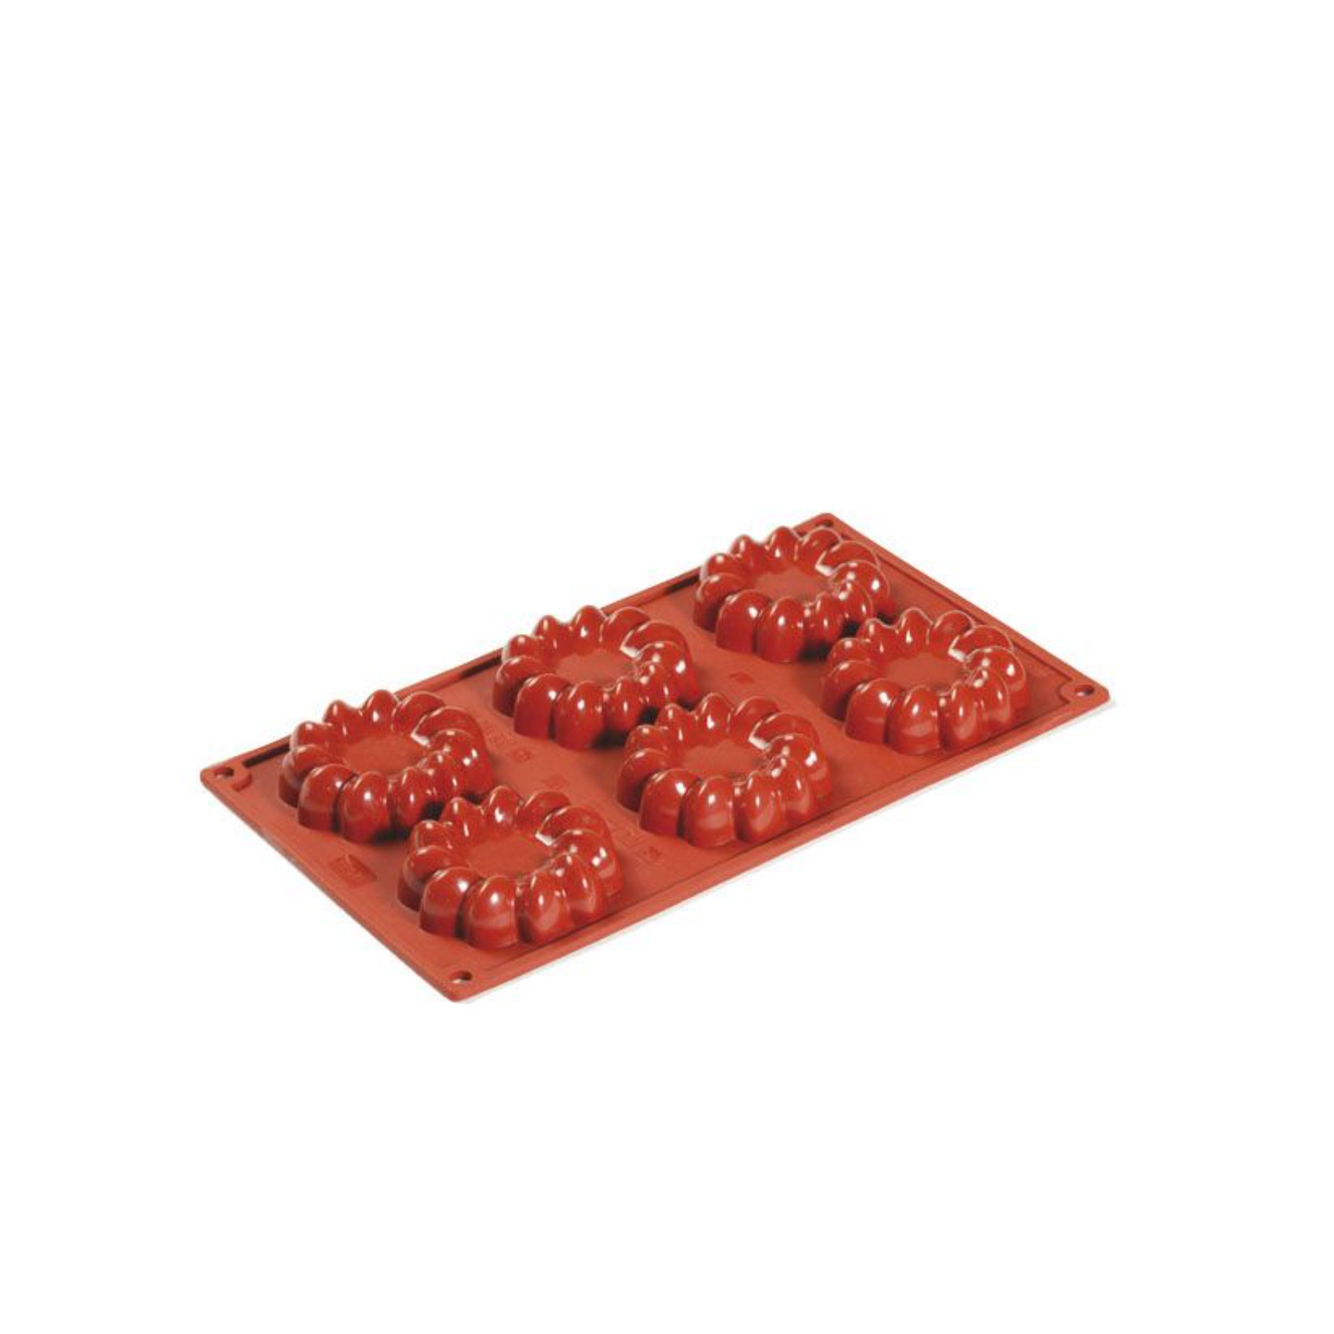 Pavoni Formaflex silicone mould "St. Honore" FR078